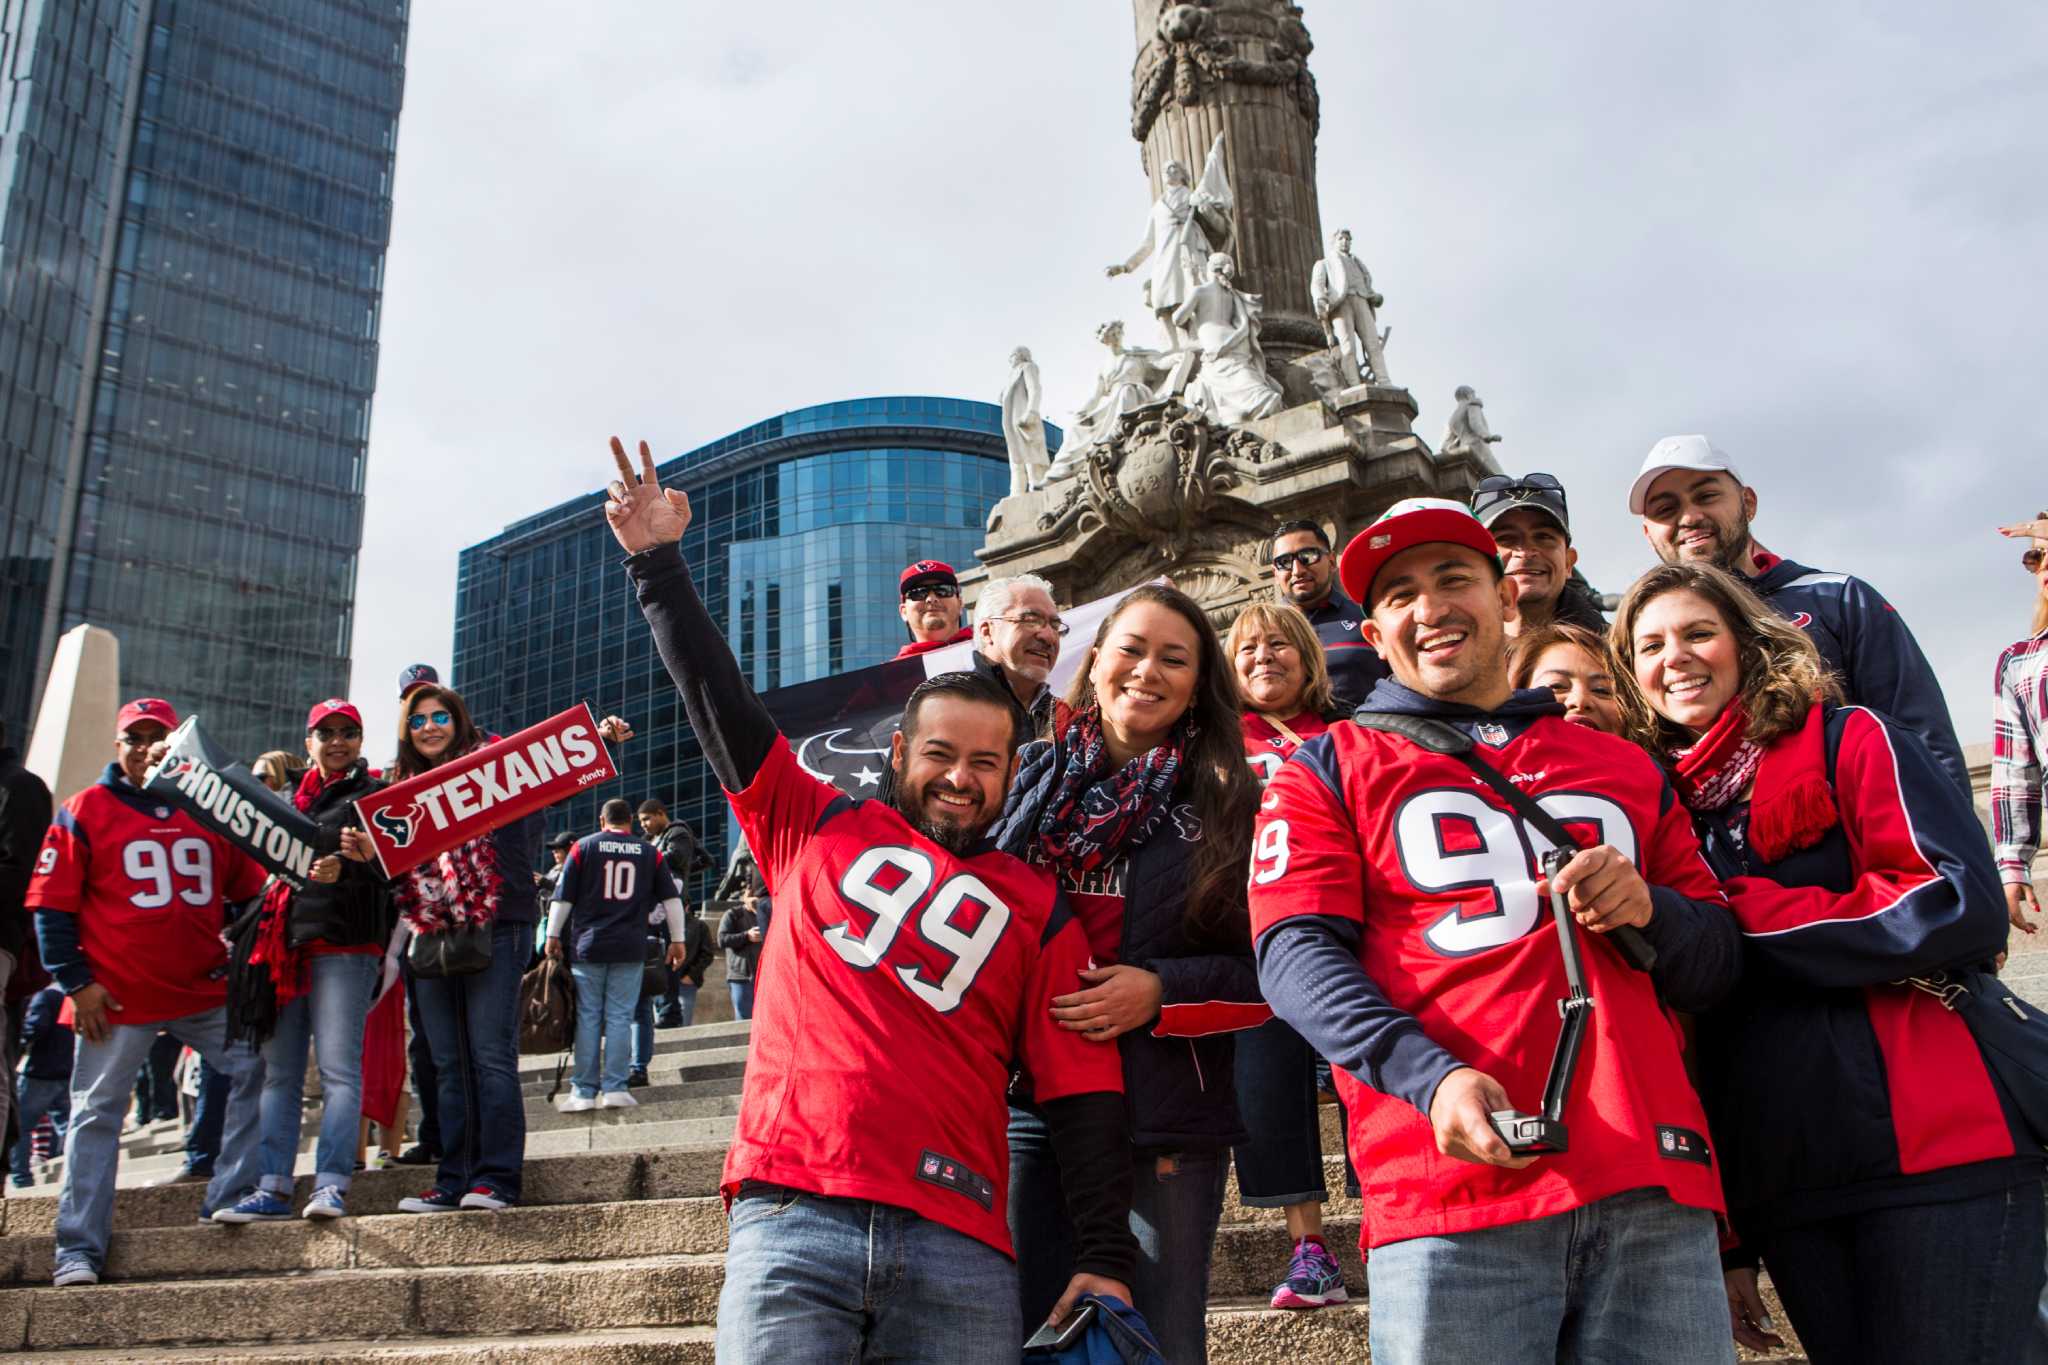 Houston Texans fans in Mexico City.